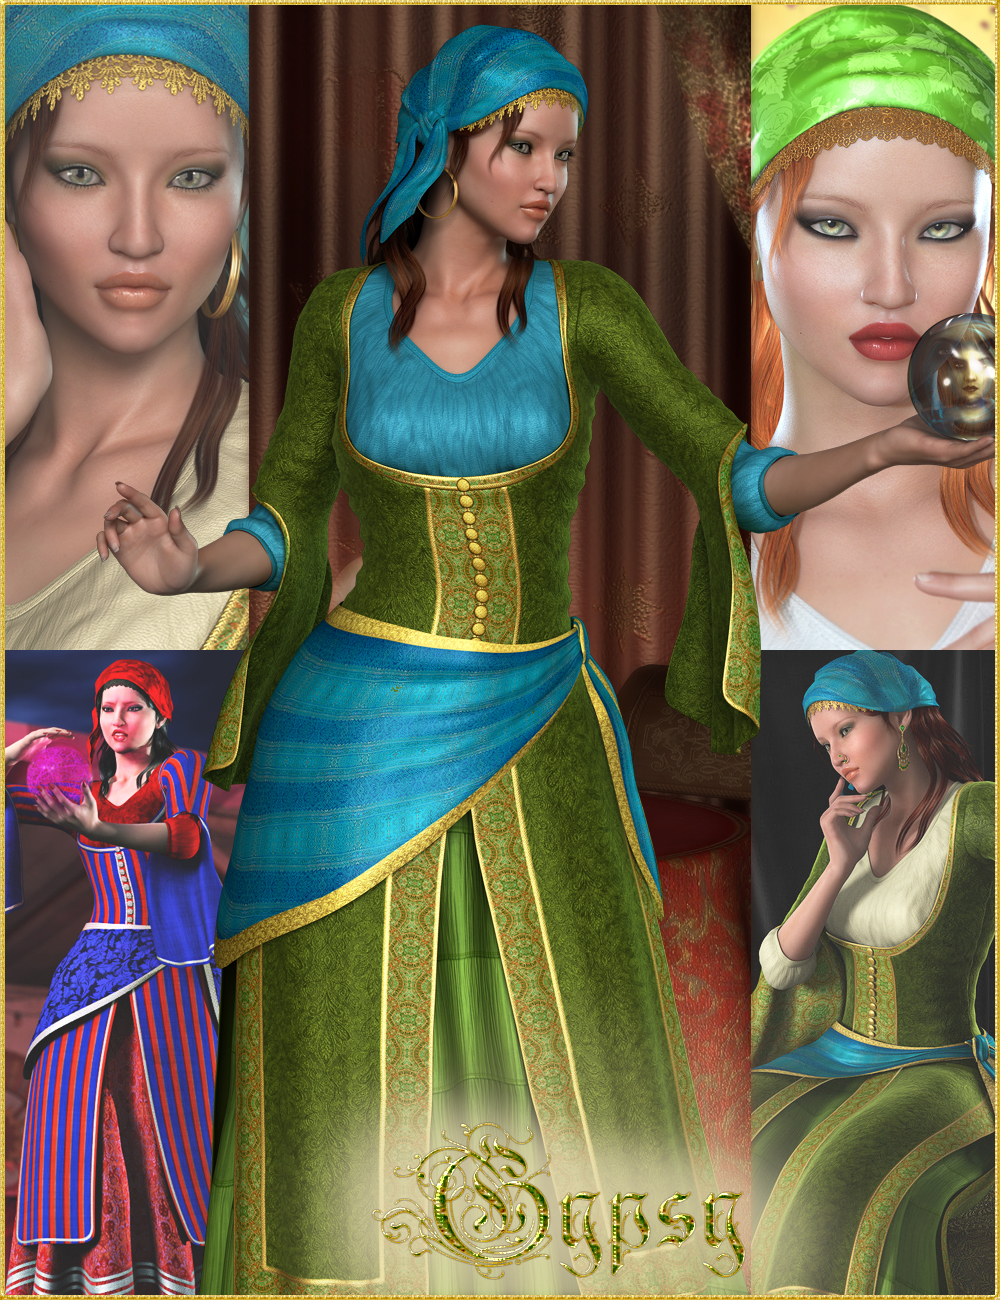 Gypsy Bundle - HD Character, Outfit, Hair and Poses by: JGreenleesValeaFred Winkler ArtFisty & DarcSedor, 3D Models by Daz 3D